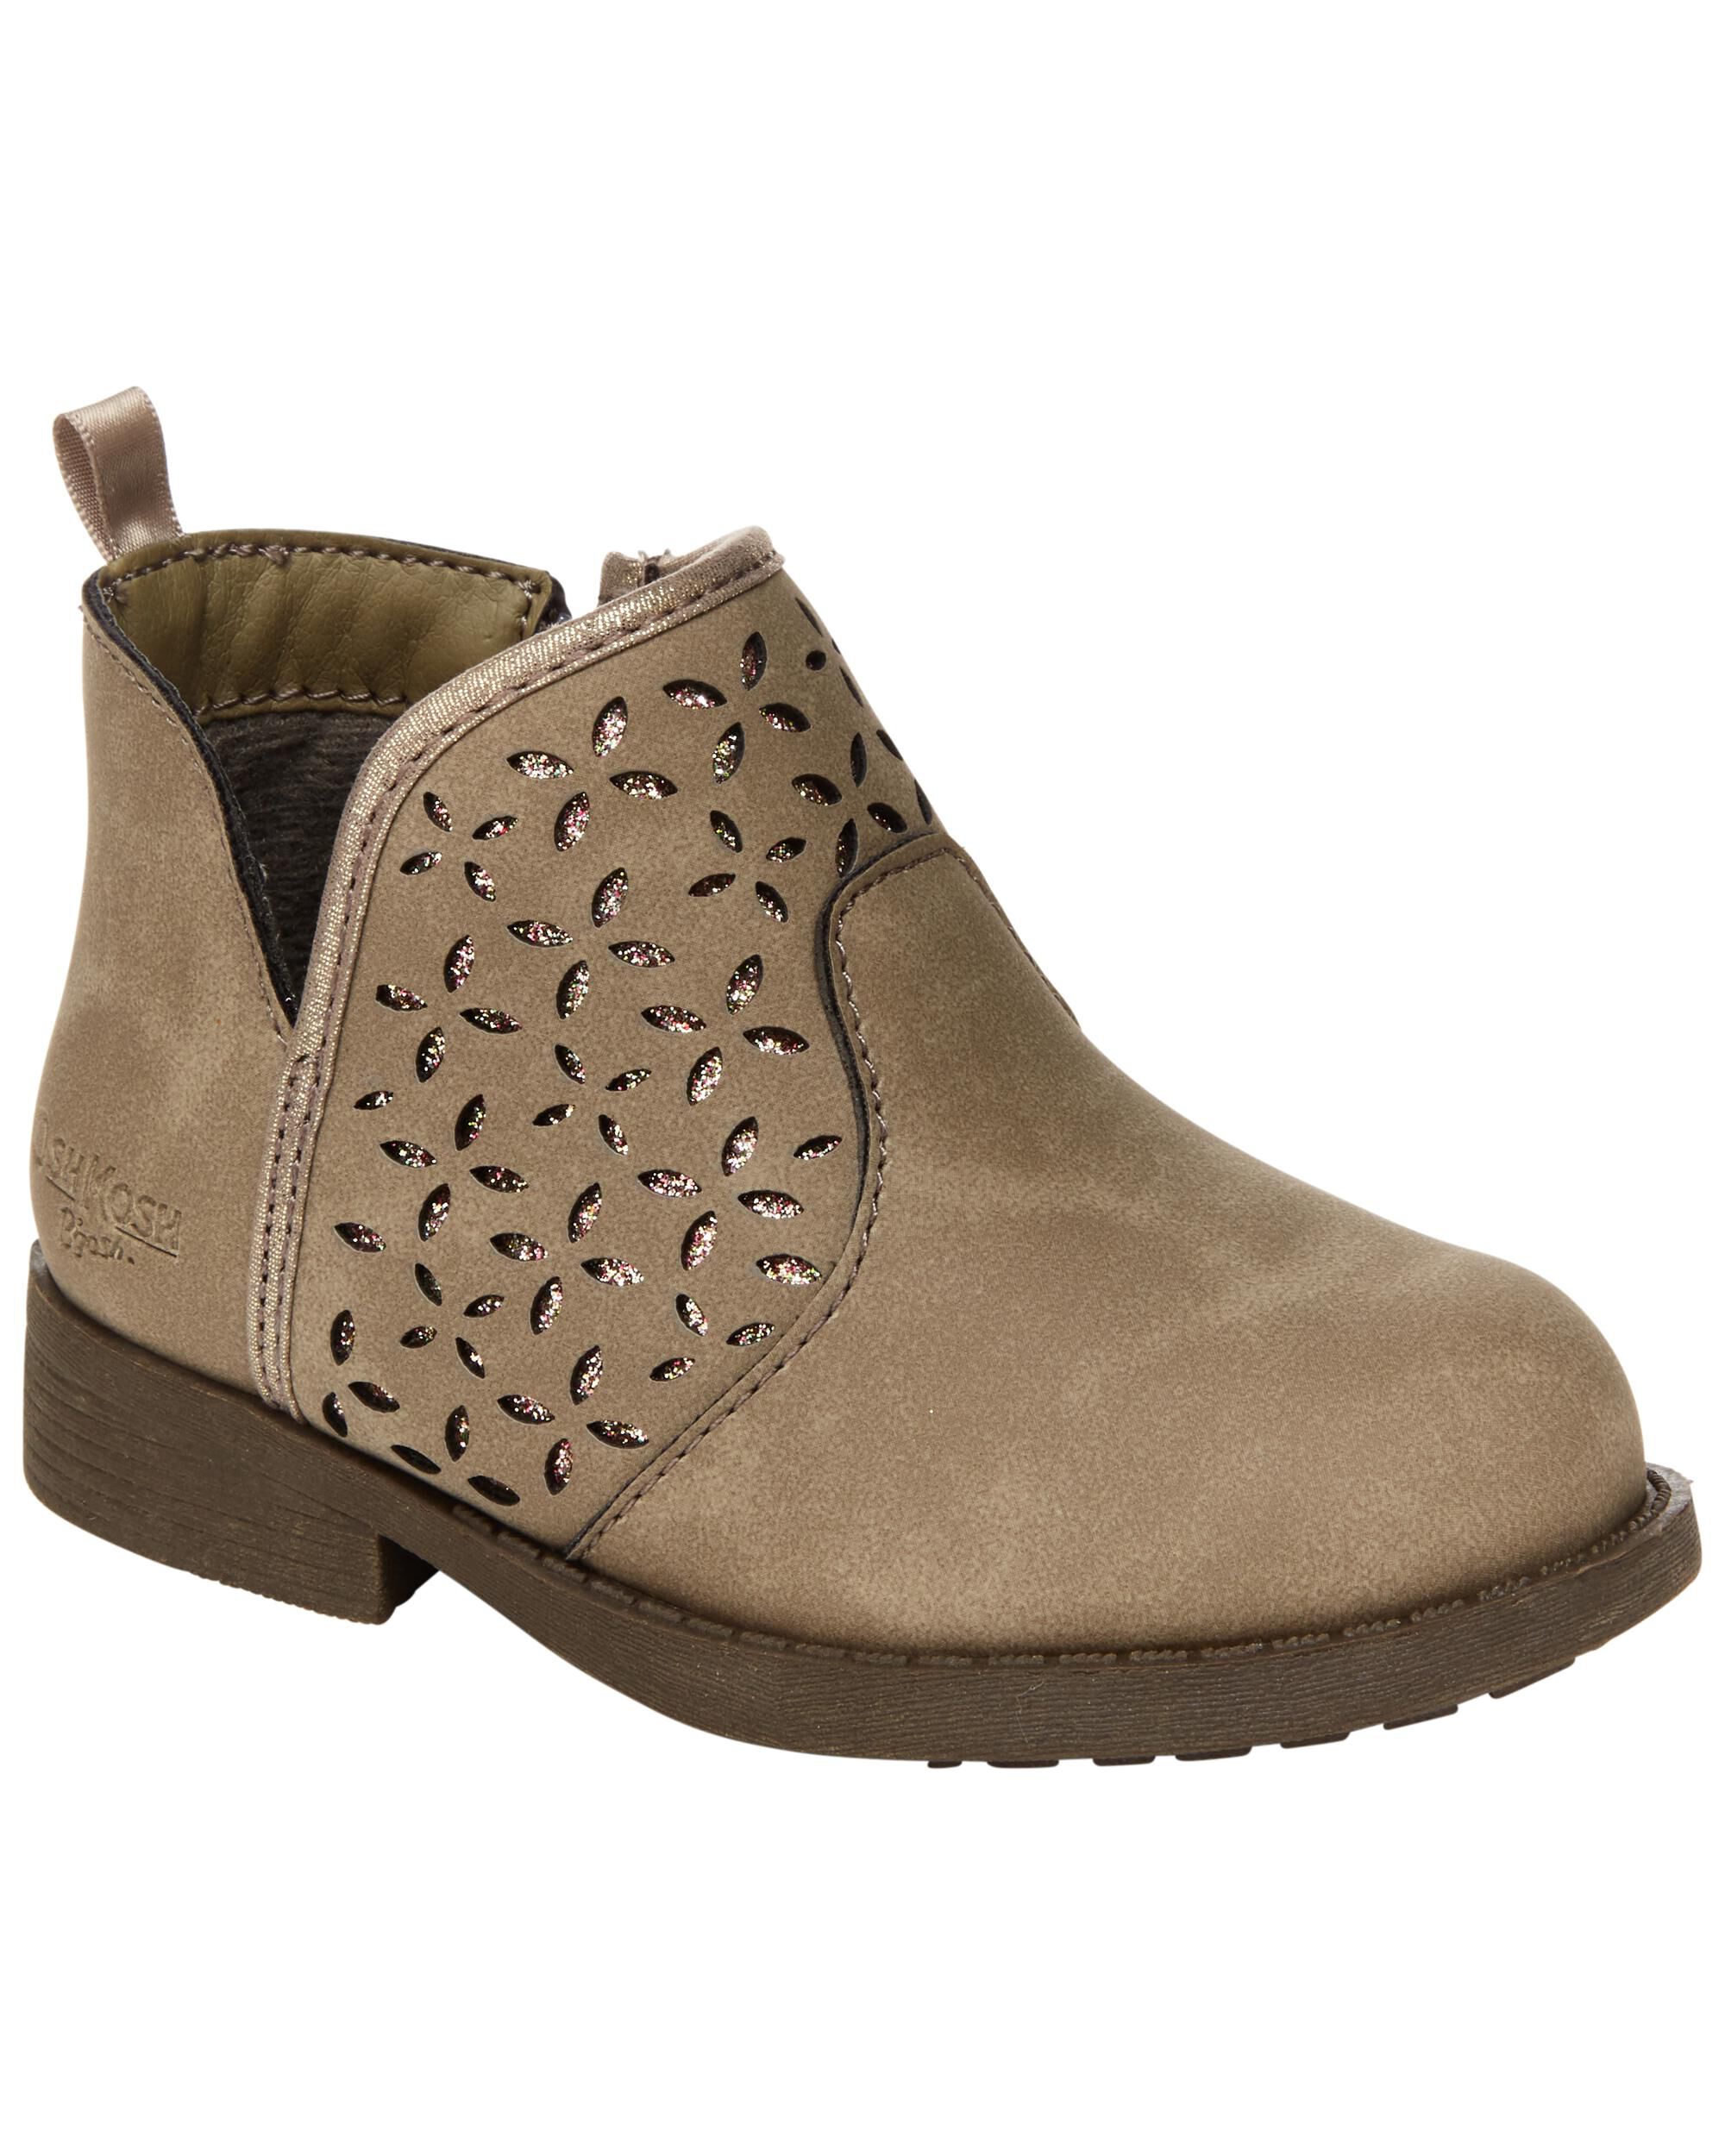 Carters Kid Estell Fashion Boots